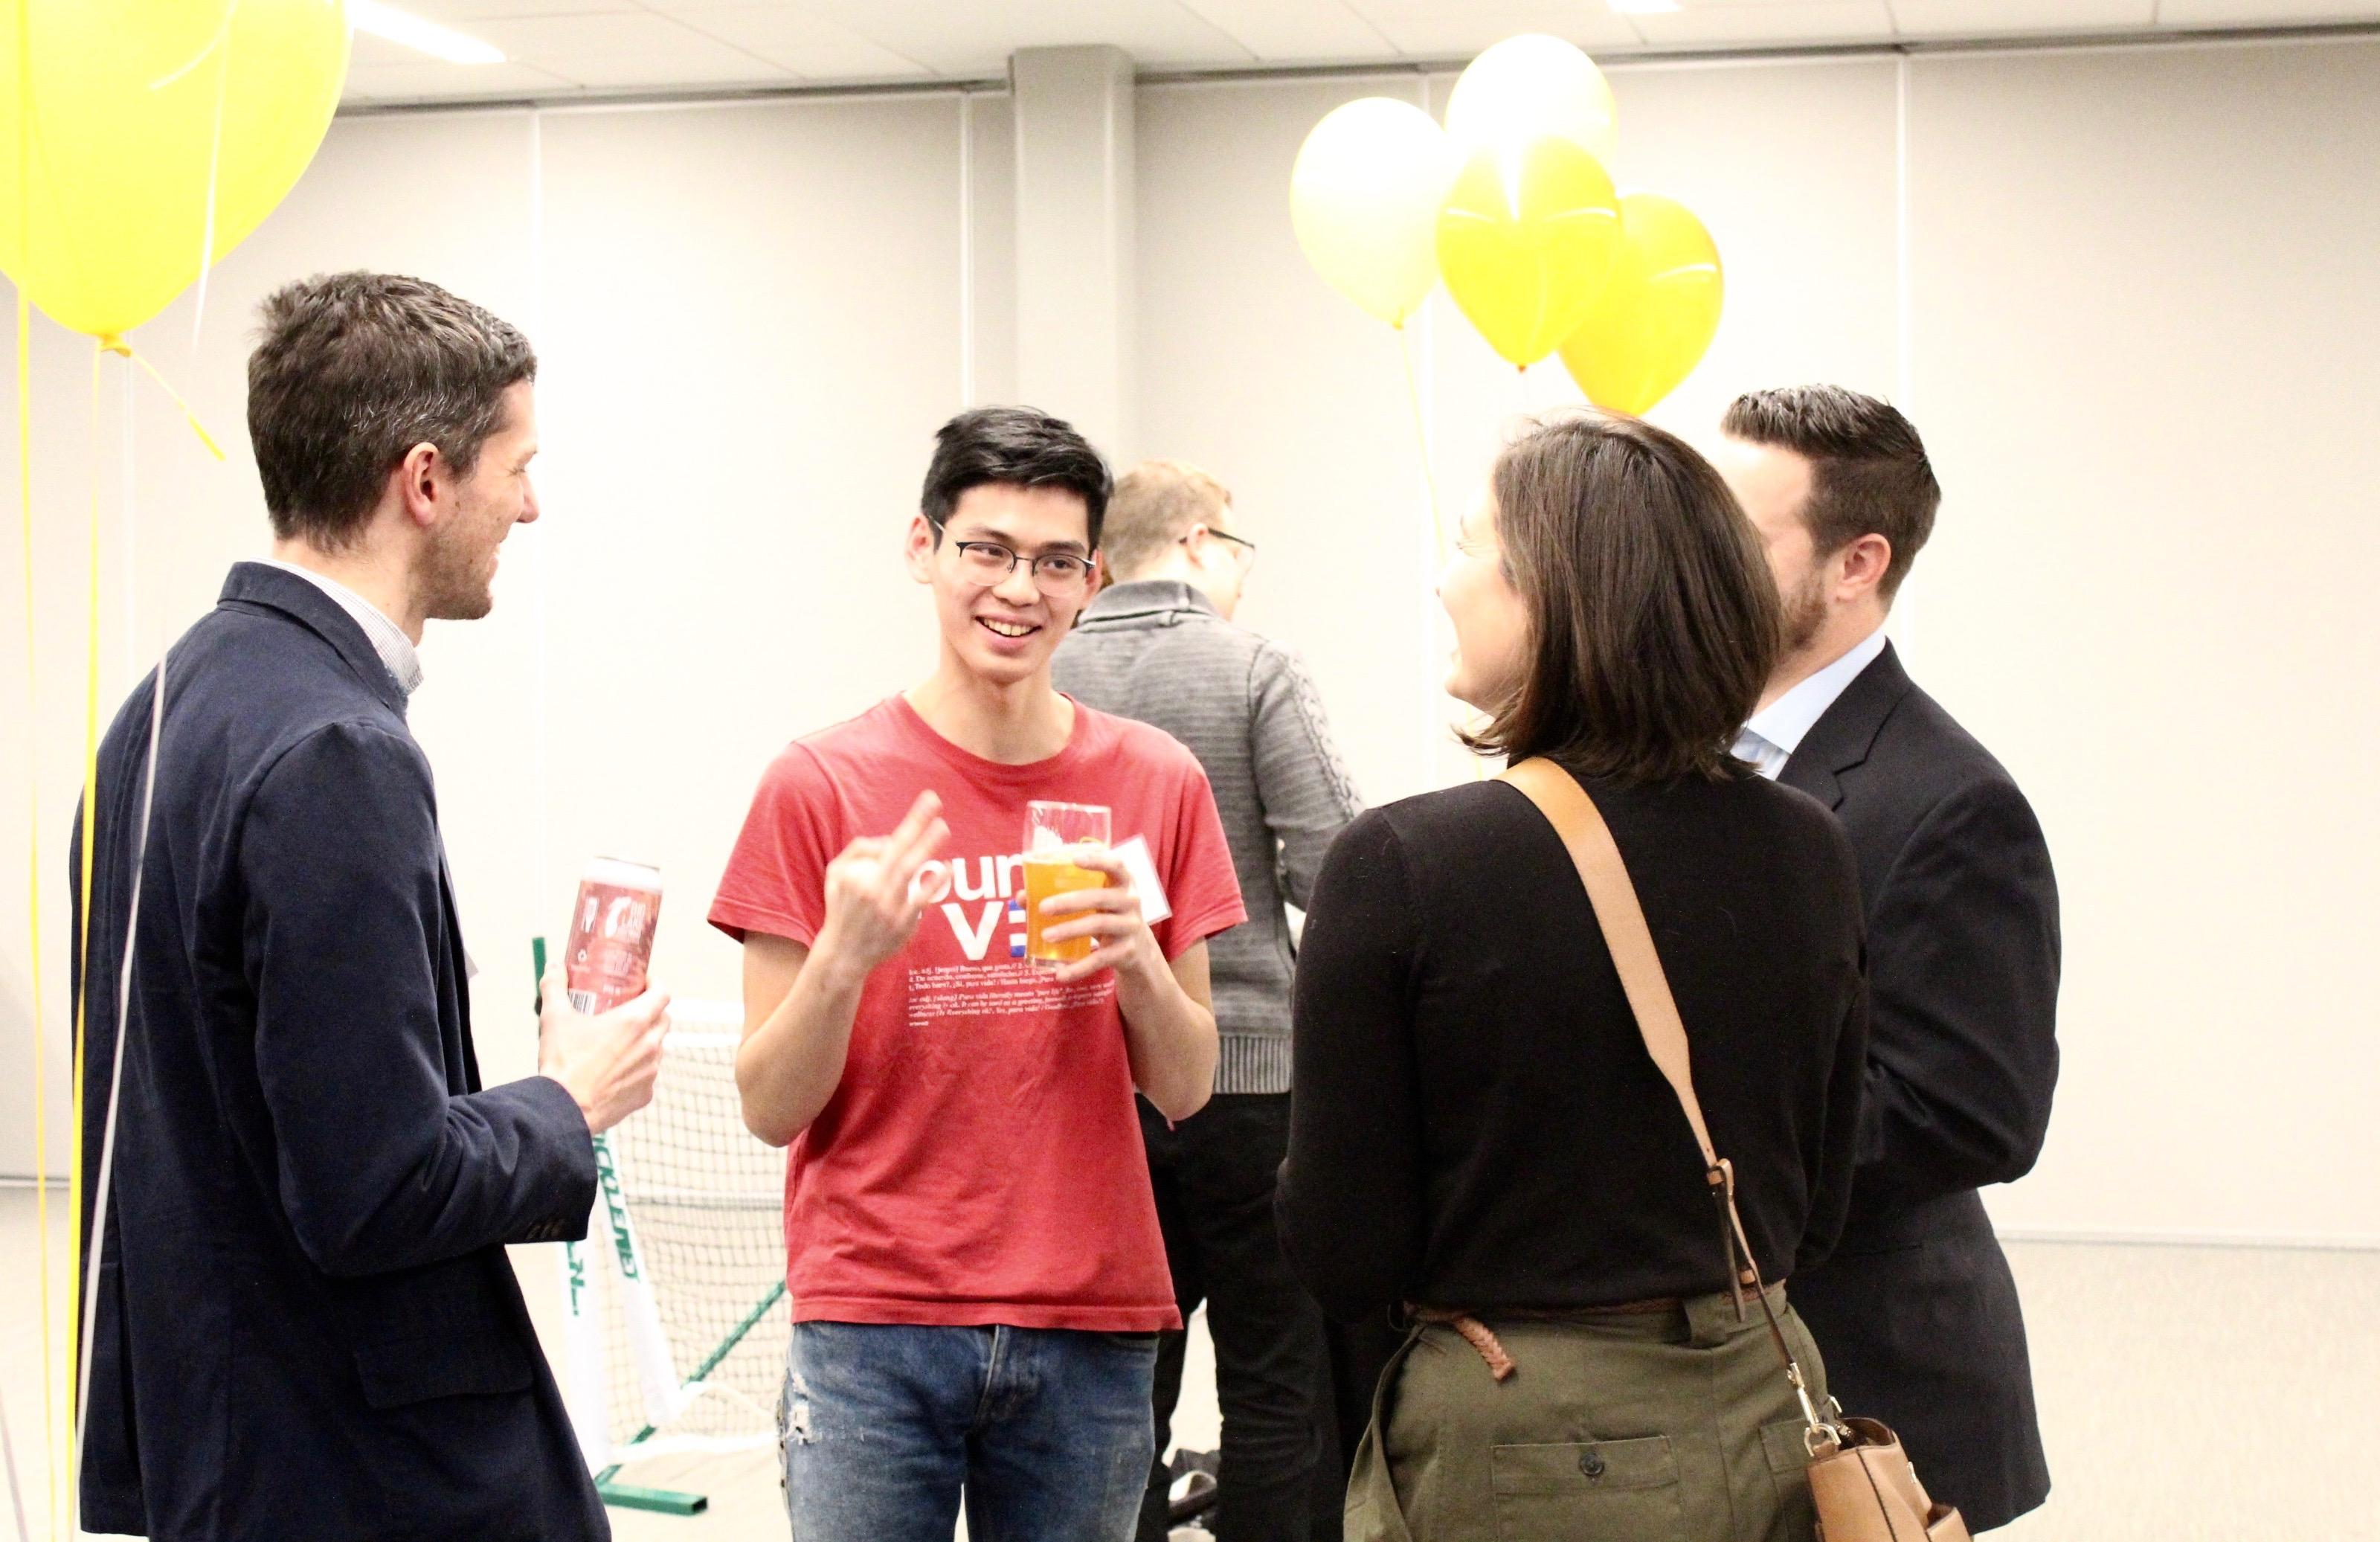 Students network with entrepreneurs at SURGE event